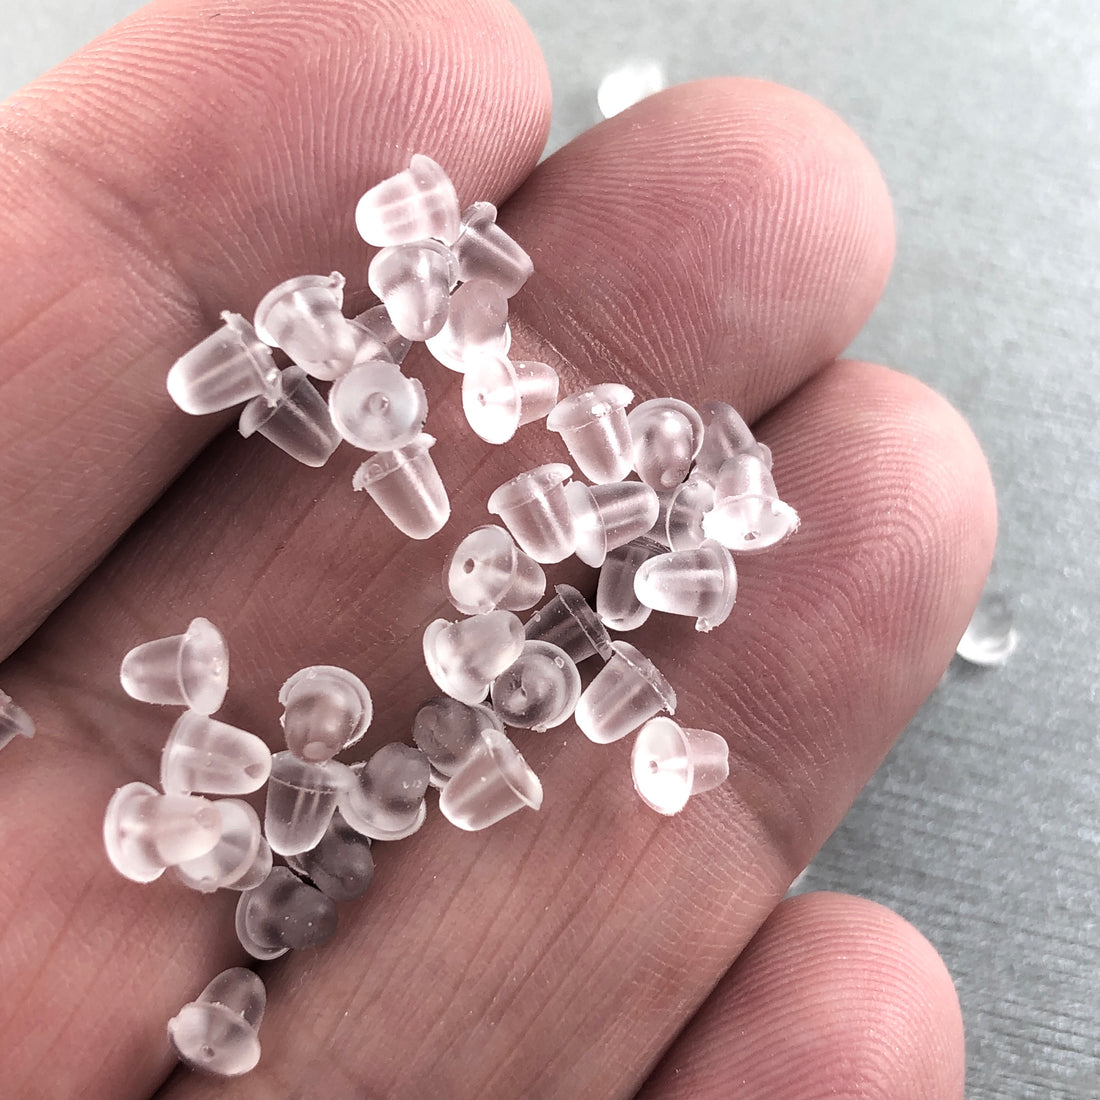 100, 500 or 1,000 BULK Clear Silicone Rubber Earring Backs, Wholesale  Stoppers, Earring Nuts Ships Immediately From USA CL416 